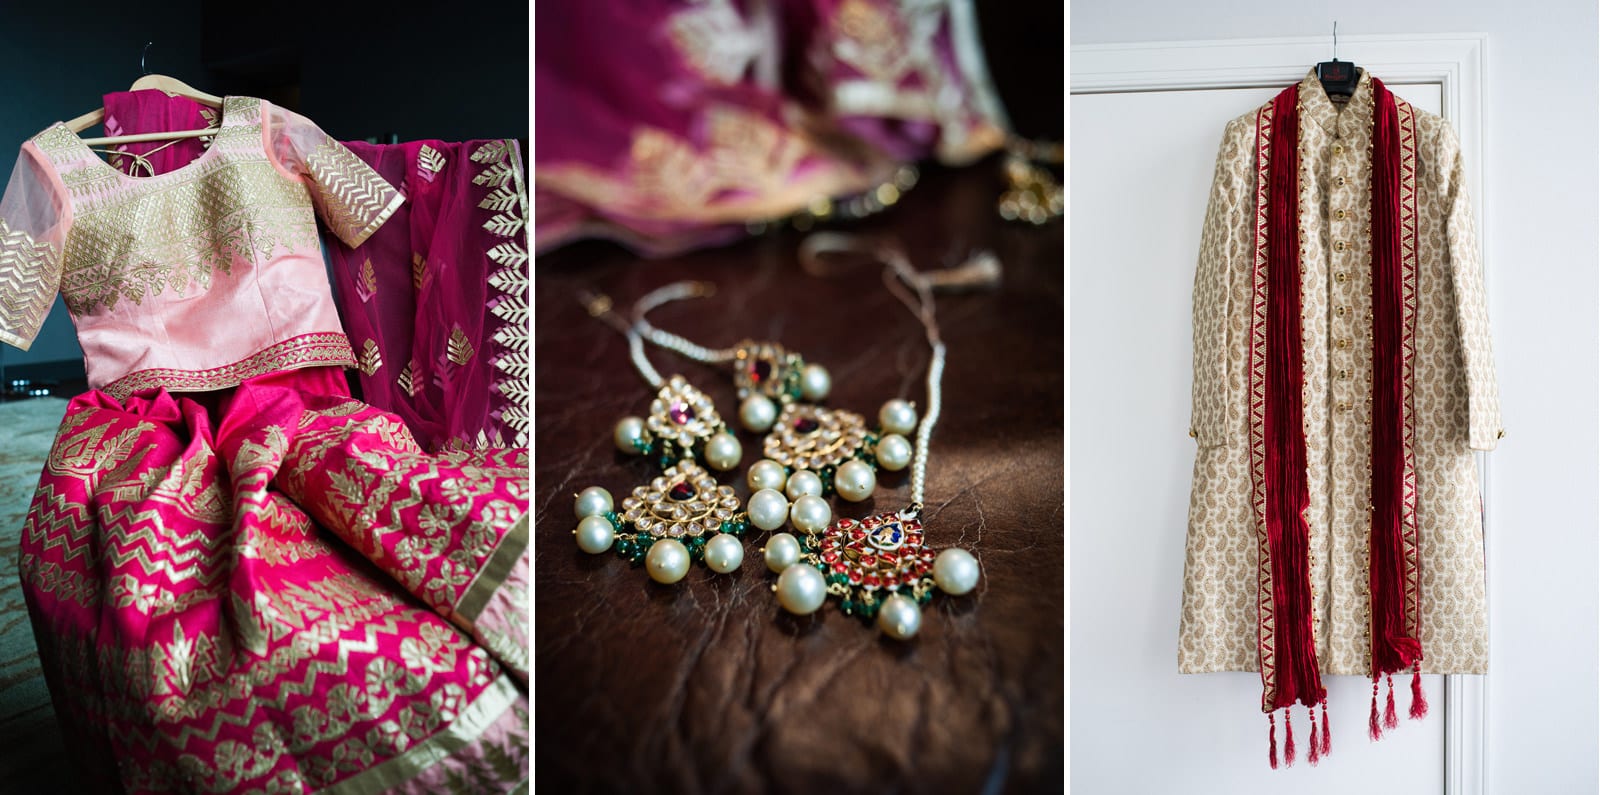 Detail photos of a gold-red-and-white sari, jewelry and a groom's outfit for a Renaissance Phipps South Asian Wedding.